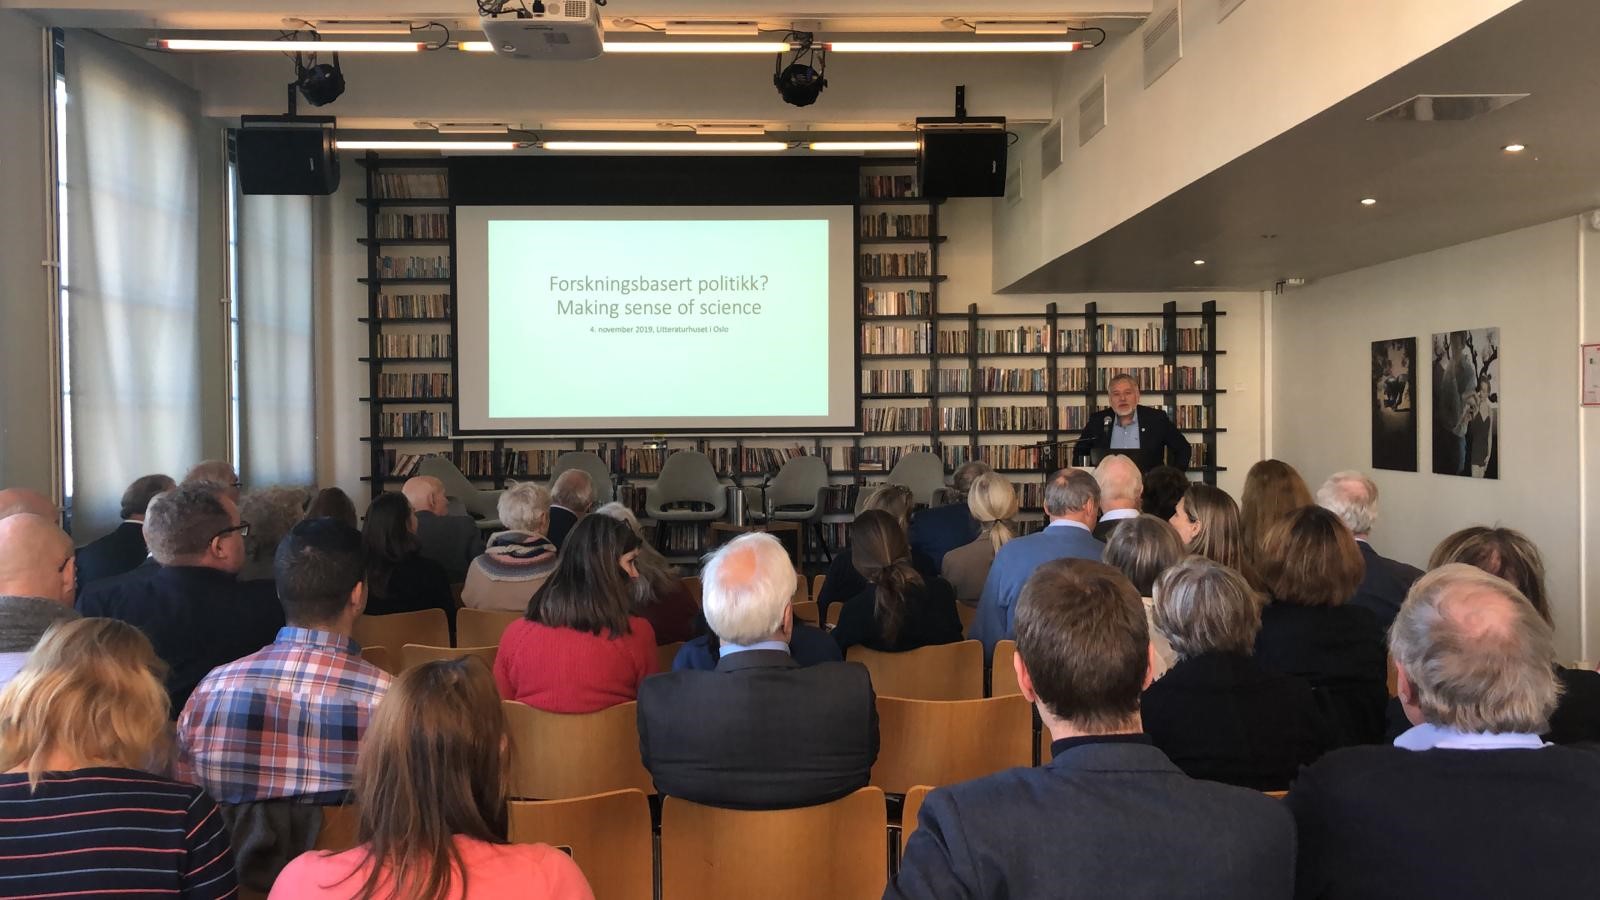 Prof Eystein Jansen, Director of the AE Bergen Hub, welcomes all to the seminar